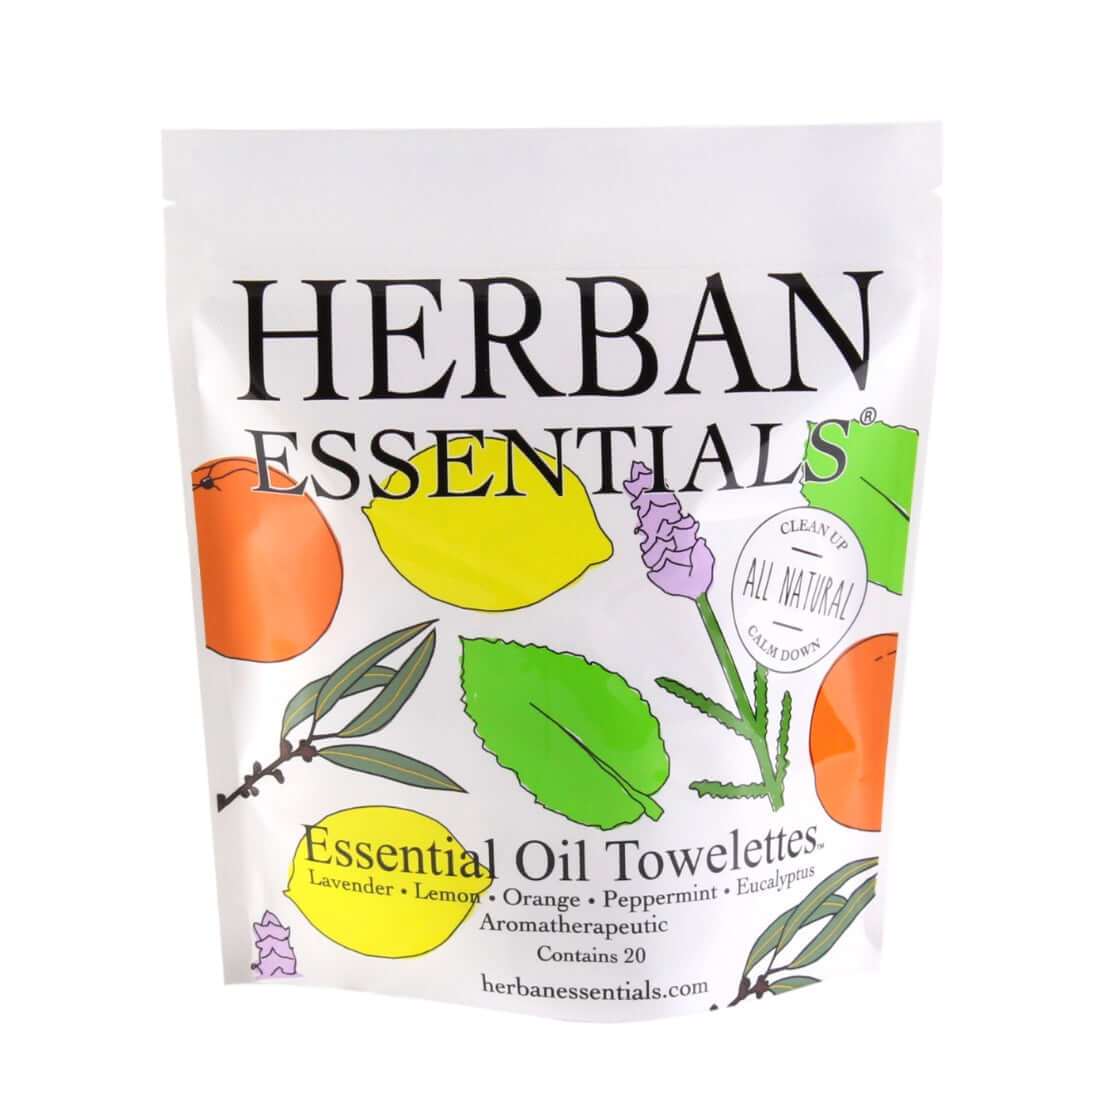 Assorted Essential Oil Towelettes by Herban Essentials